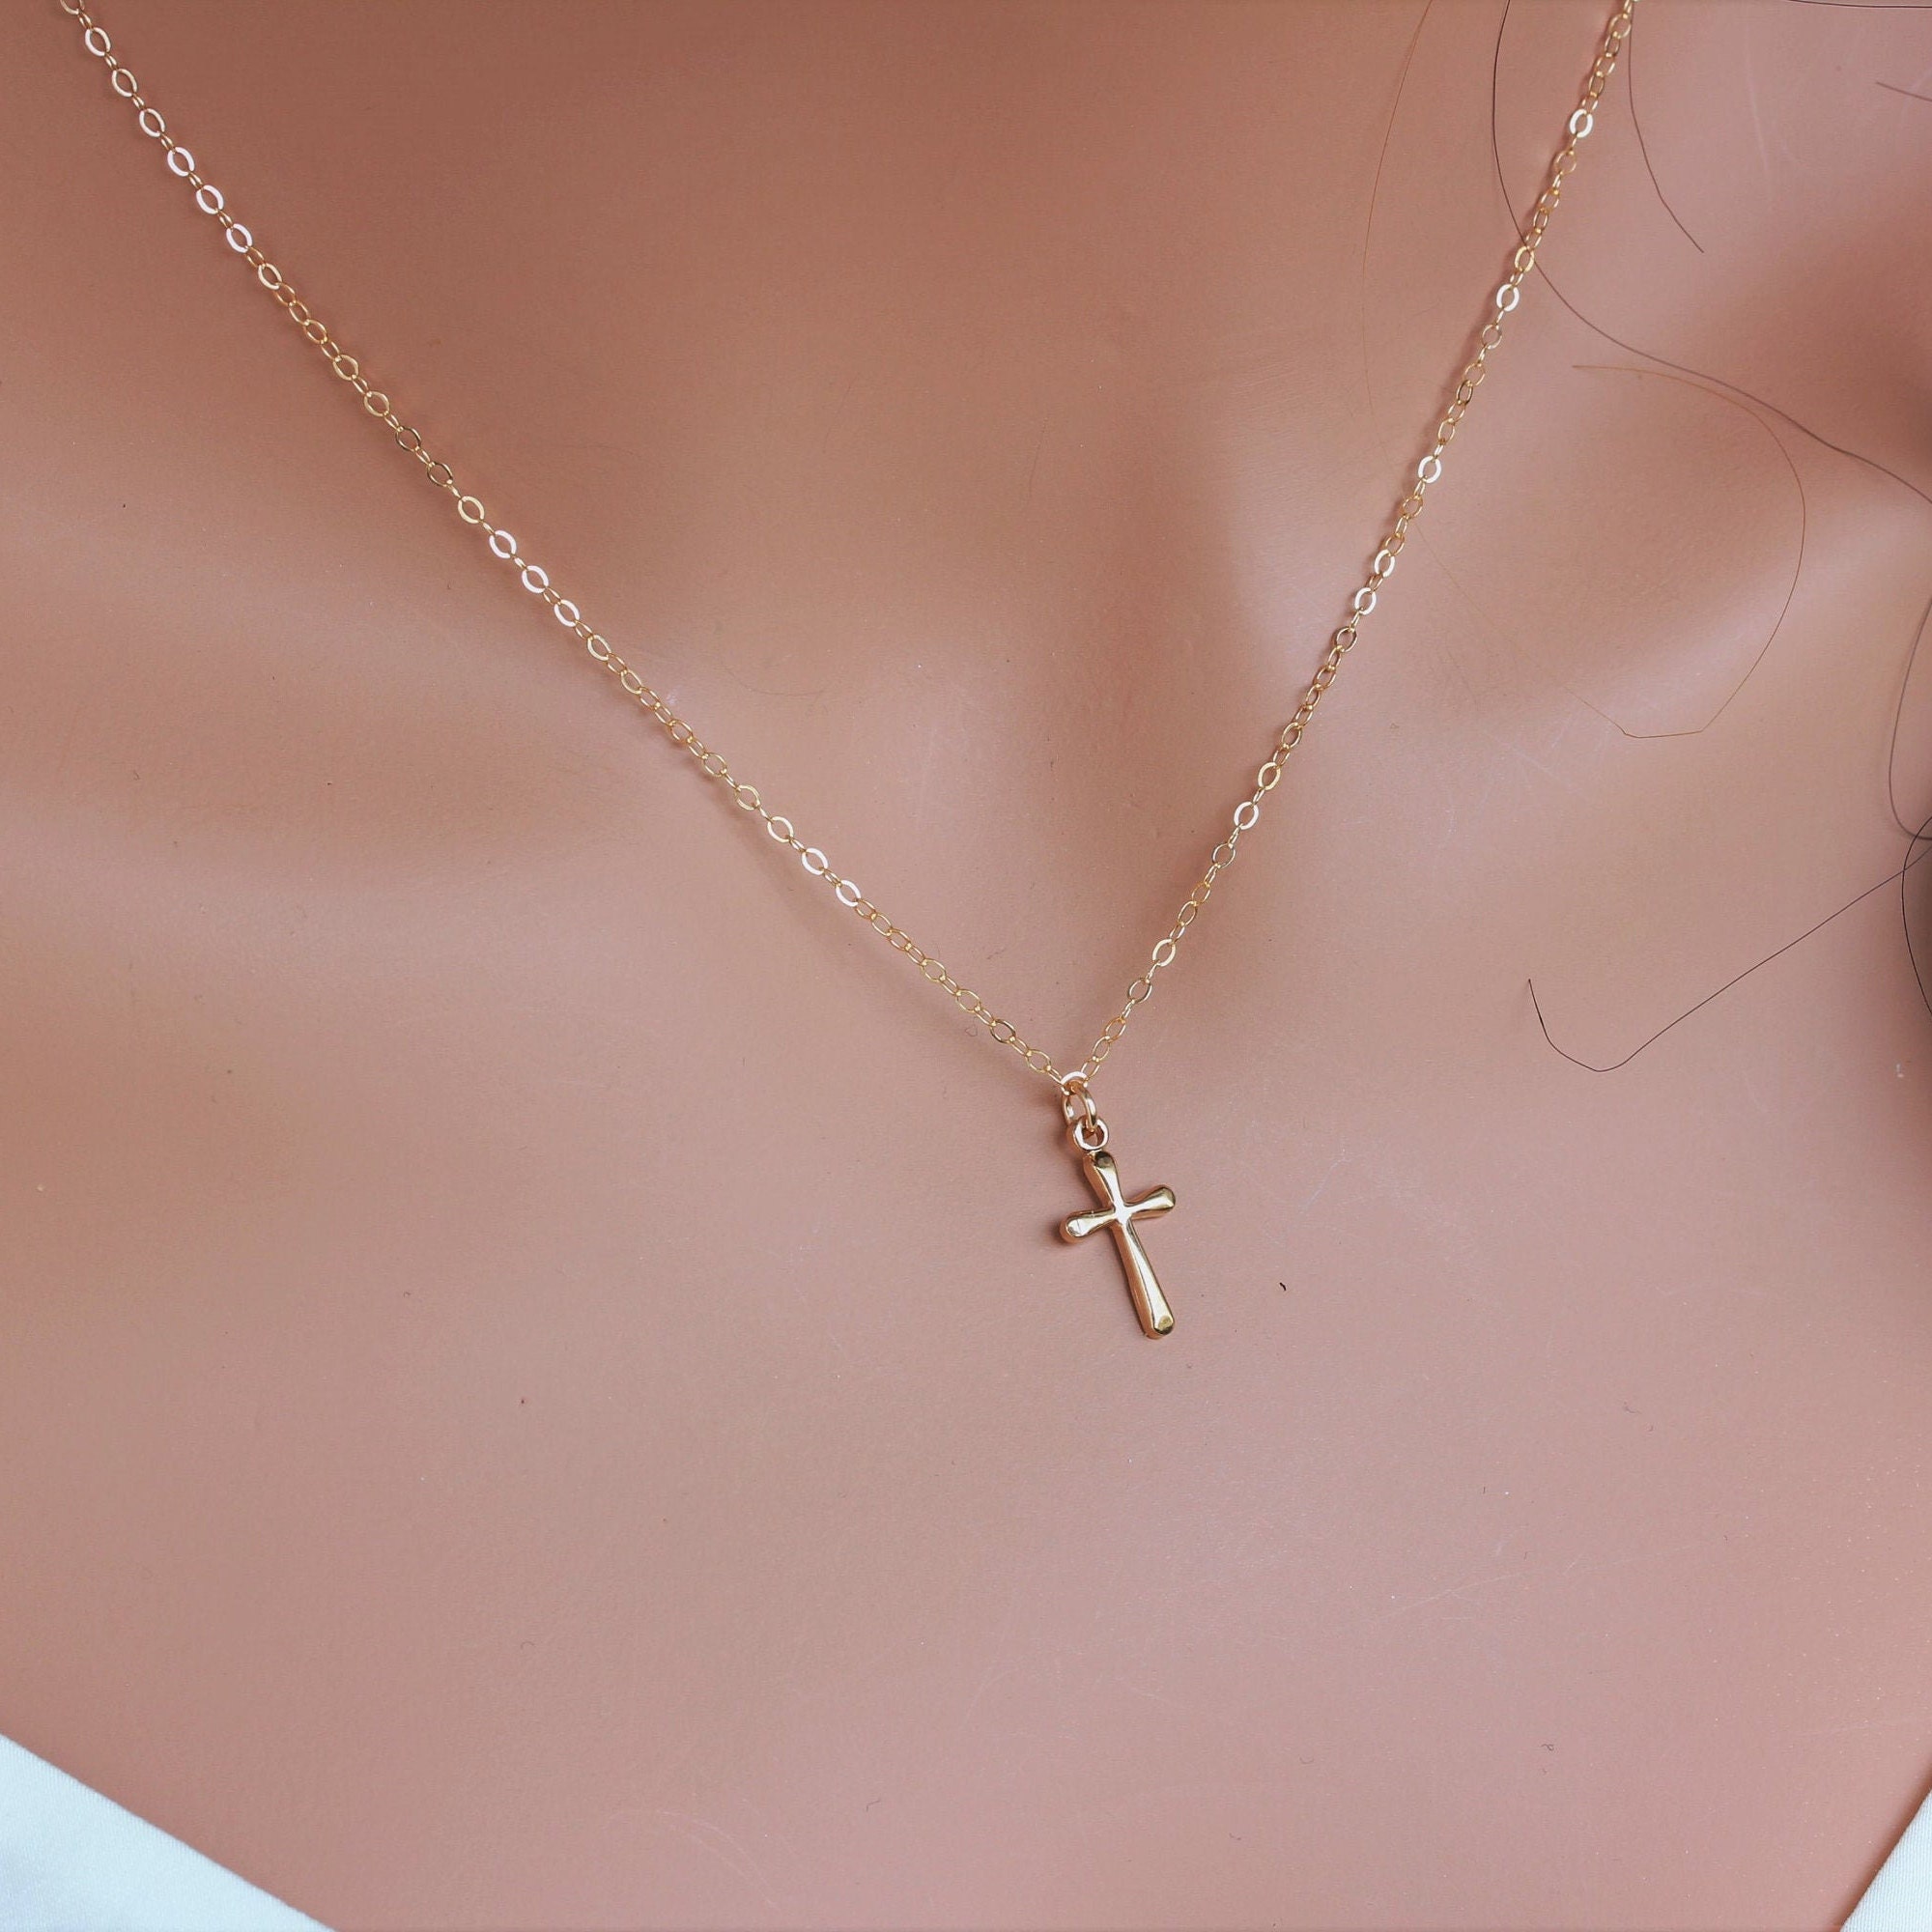 Gold cross necklace women Small Cross necklace for girls | Etsy